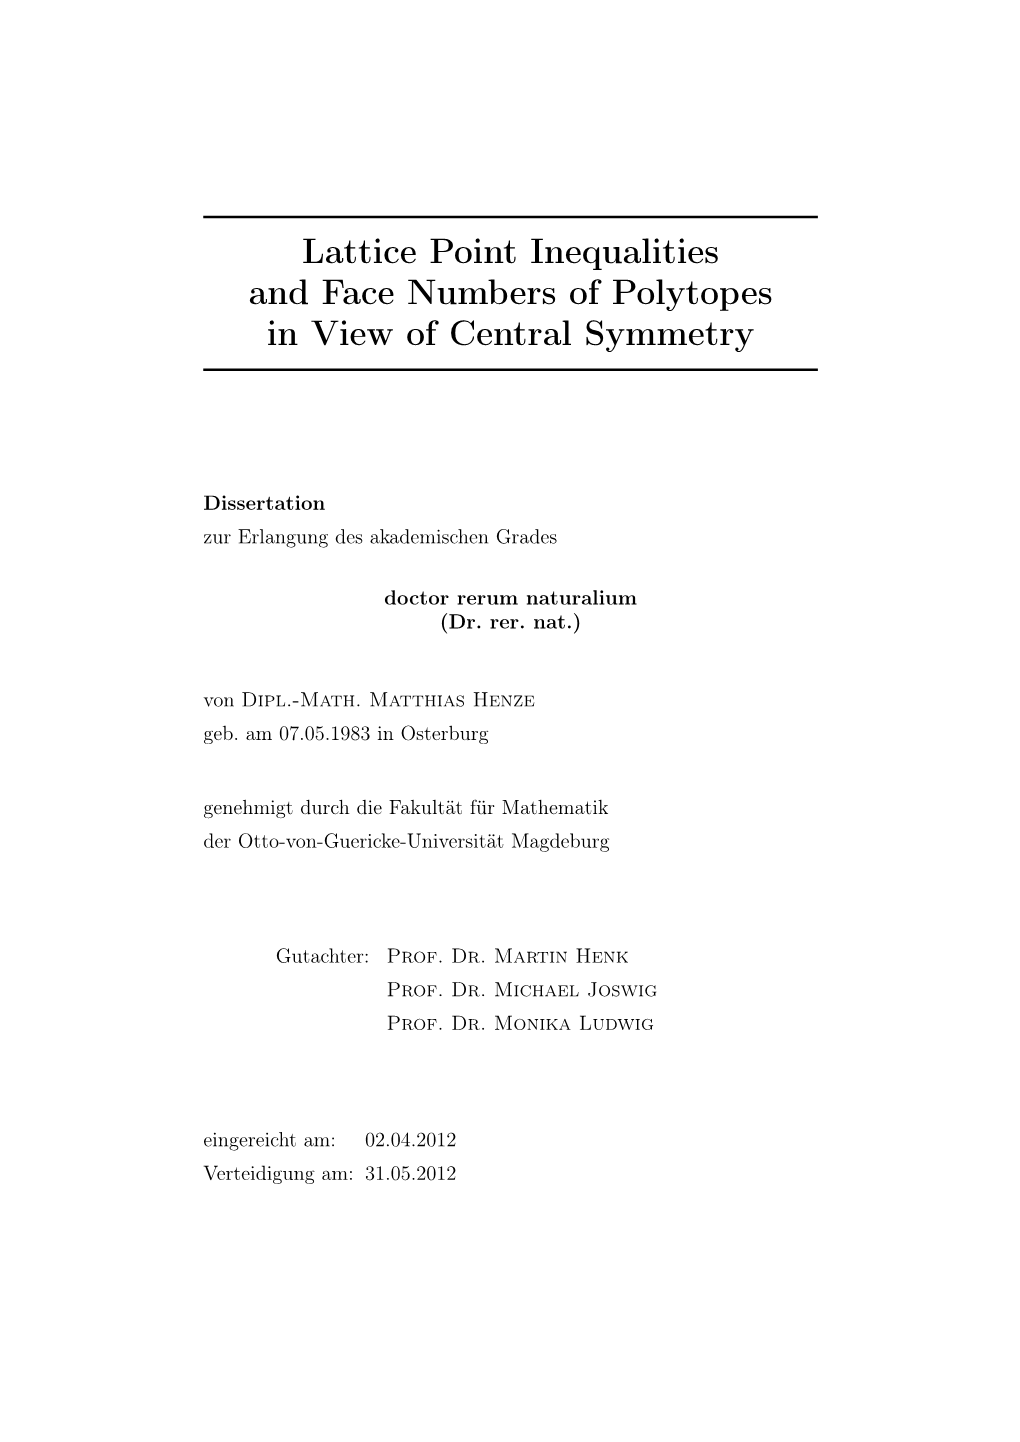 Lattice Point Inequalities and Face Numbers of Polytopes in View of Central Symmetry